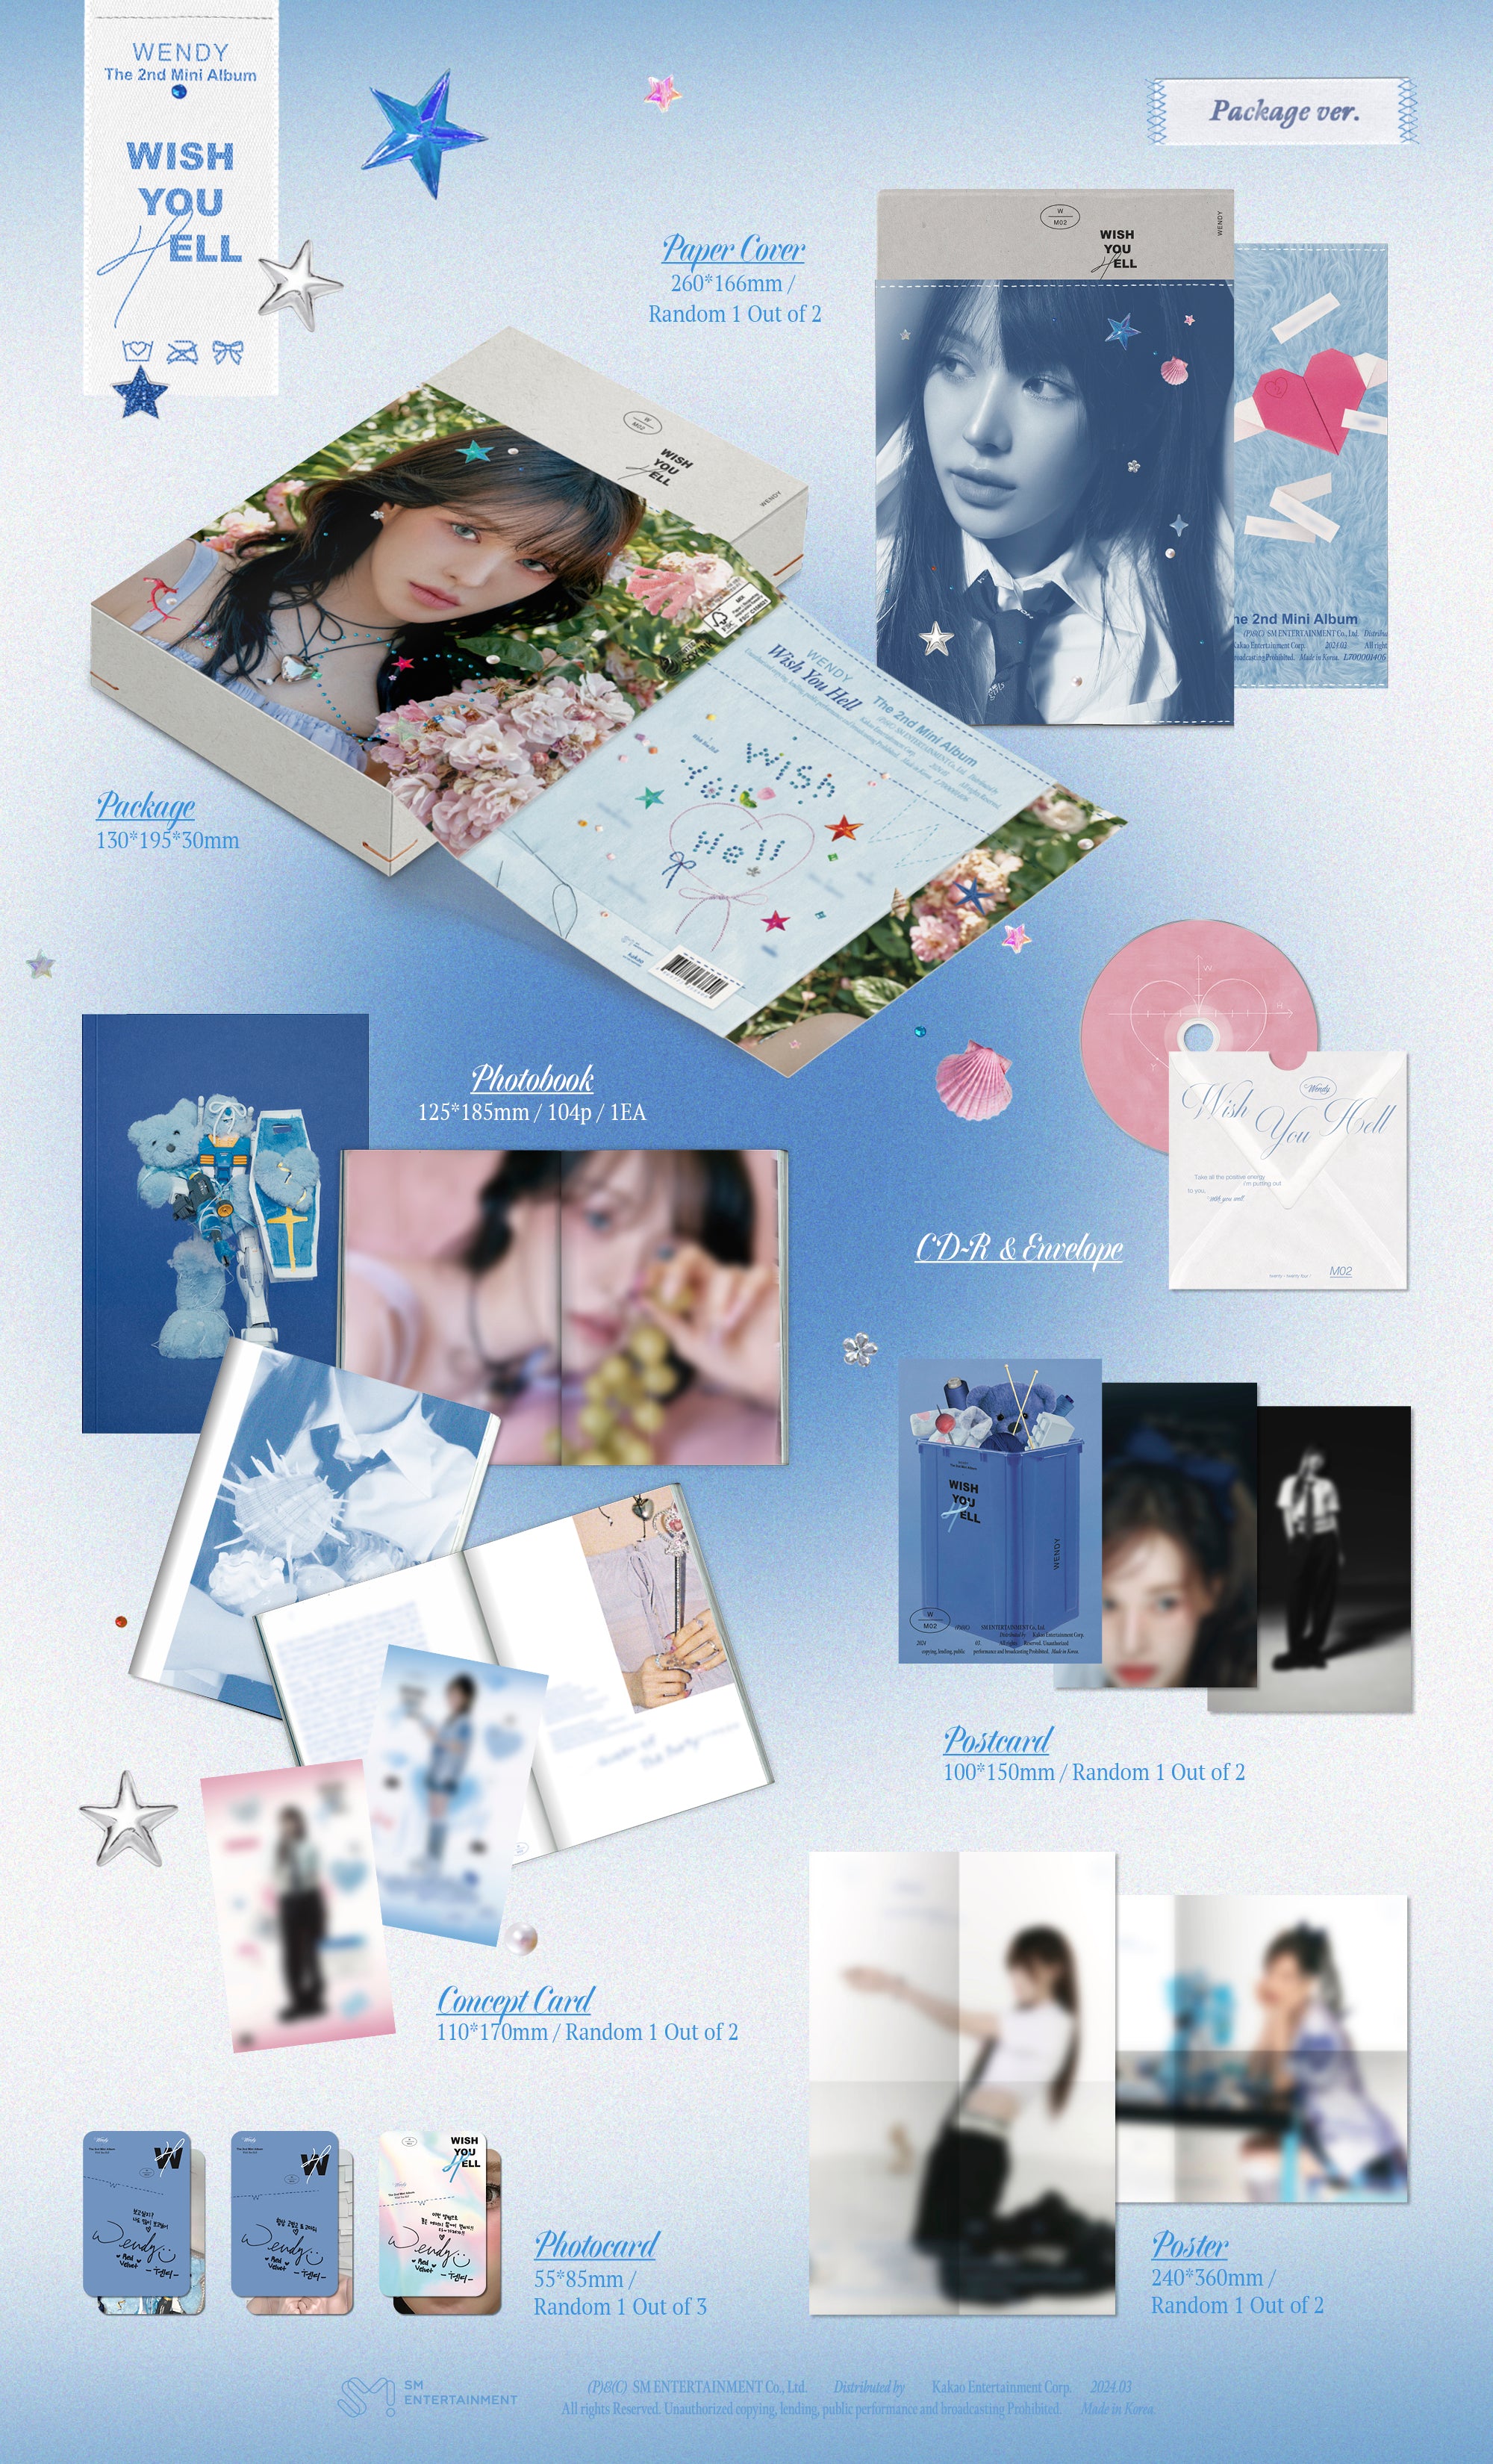 WENDY - 2ND MINI ALBUM [Wish You Hell] PACKAGE Ver.